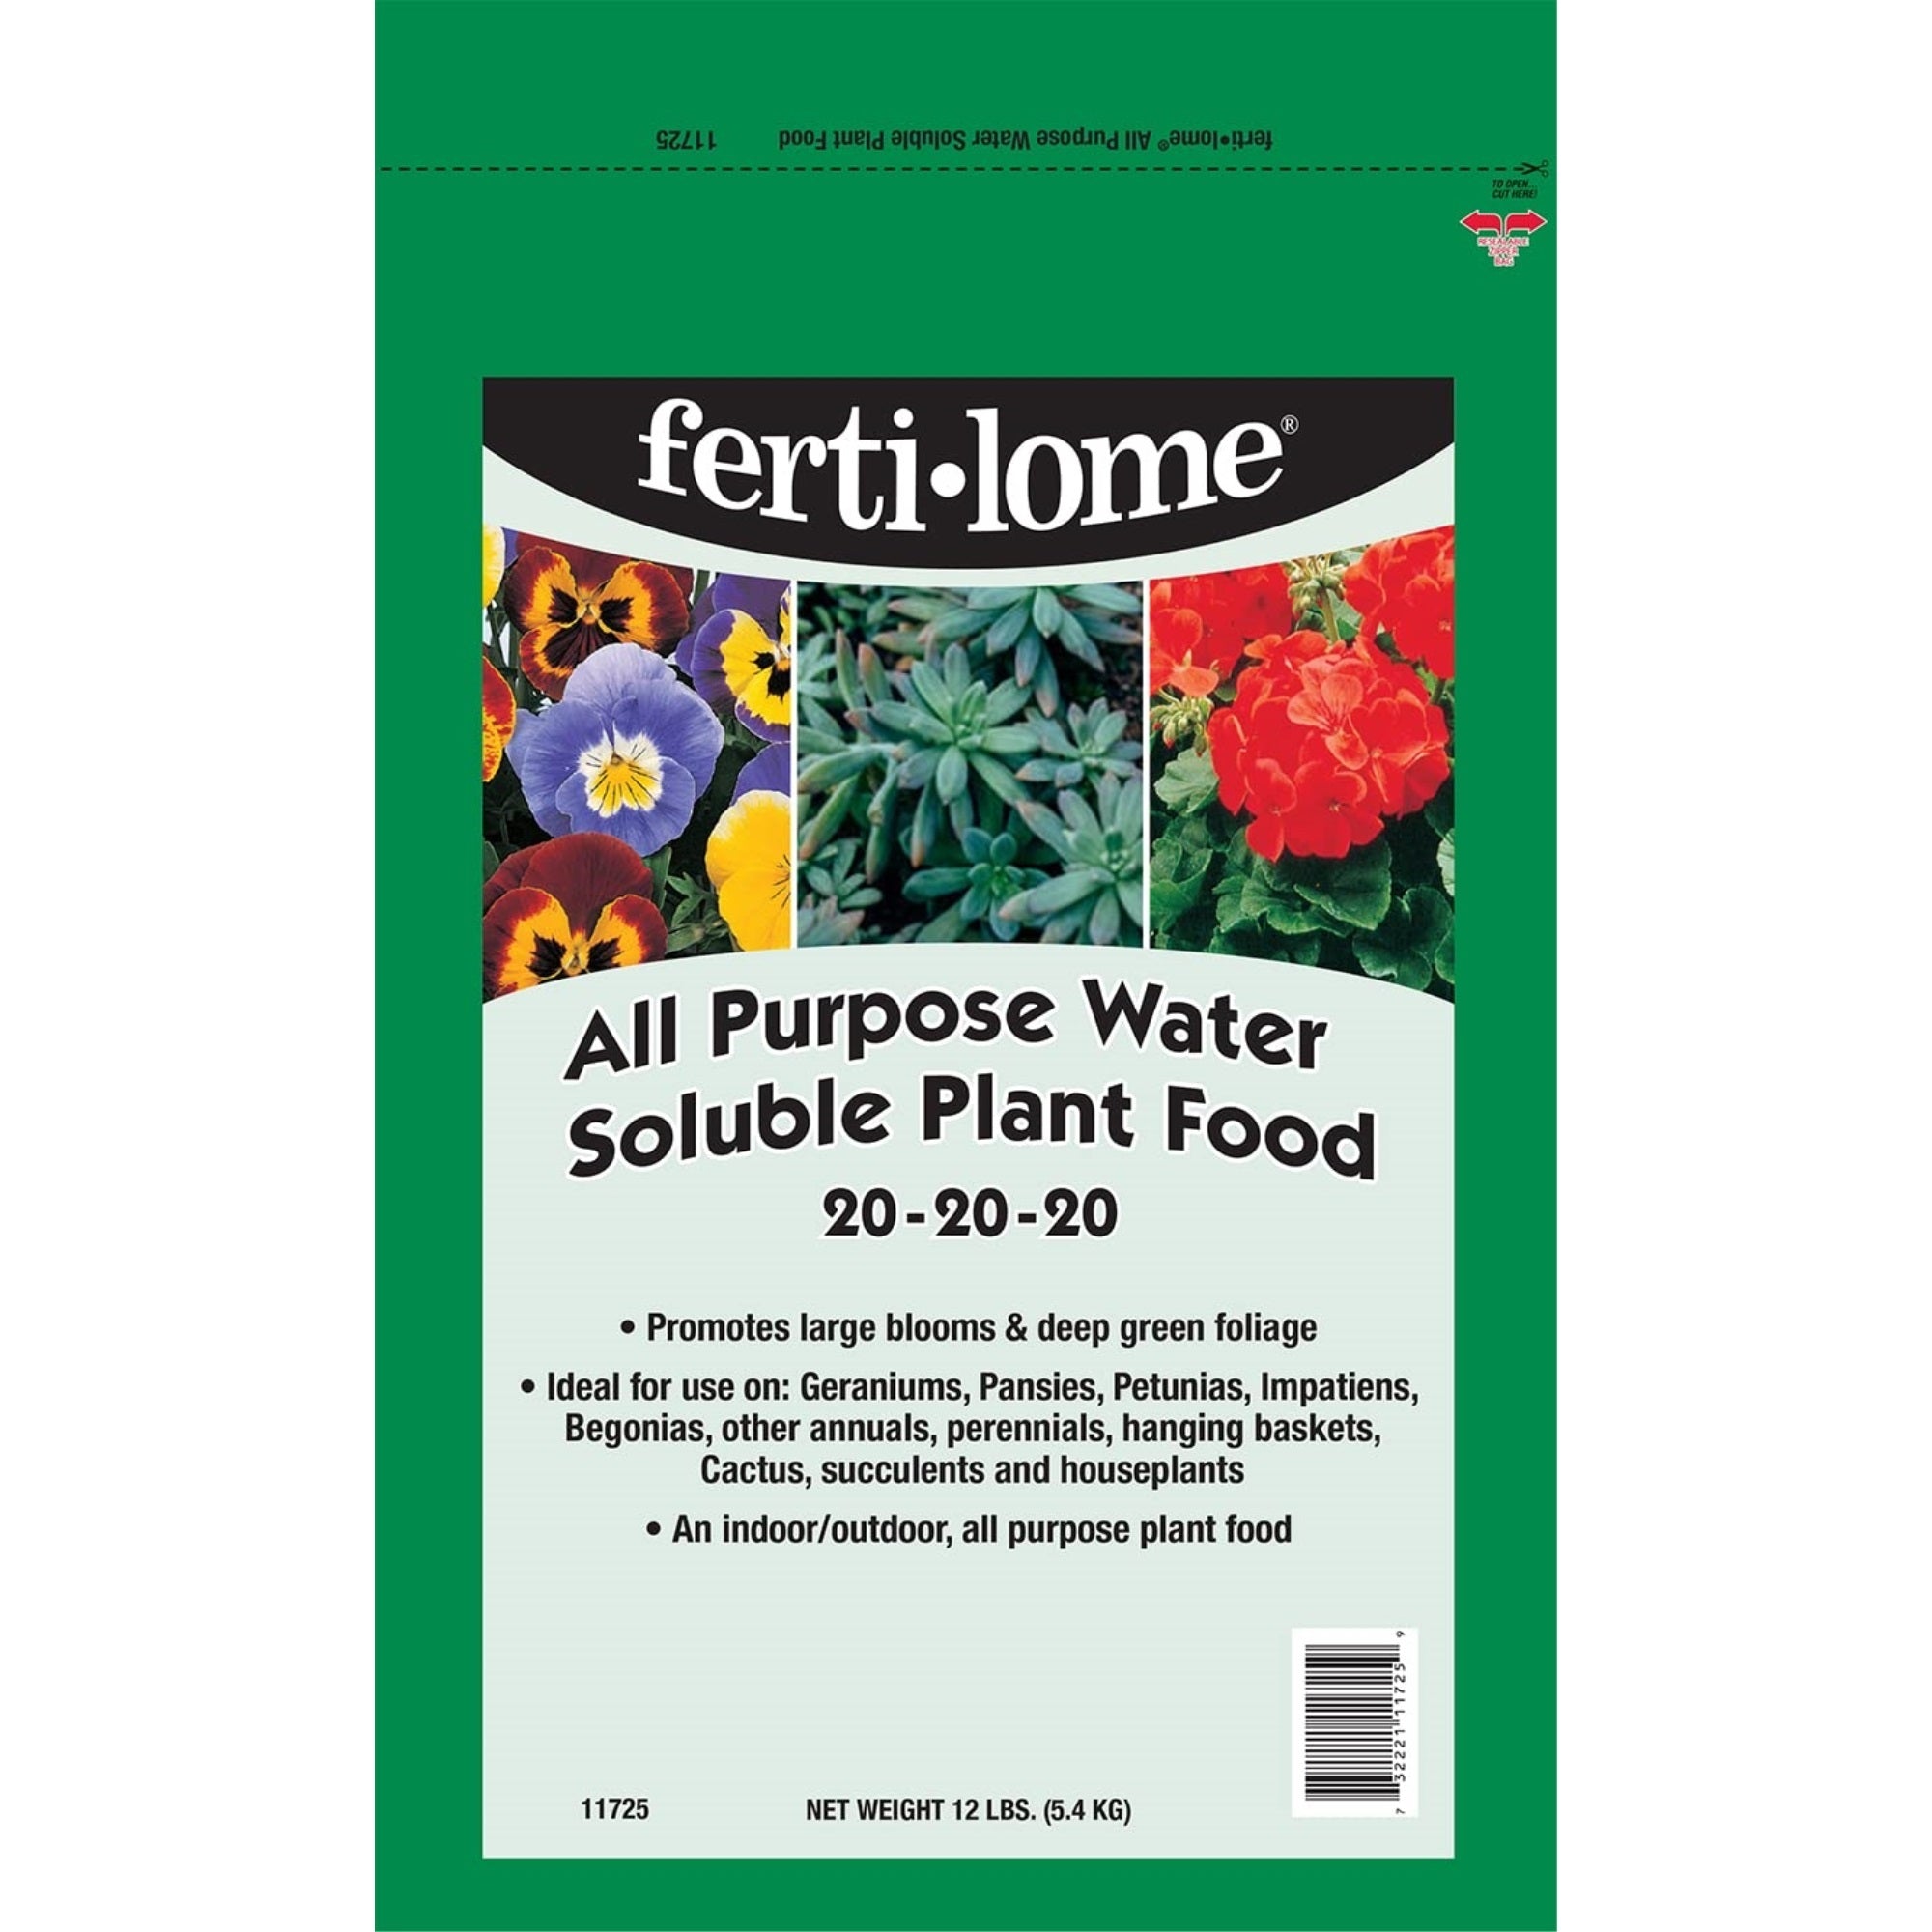 Fertilome All Purpose Water Soluble Plant Food, 20-20-20